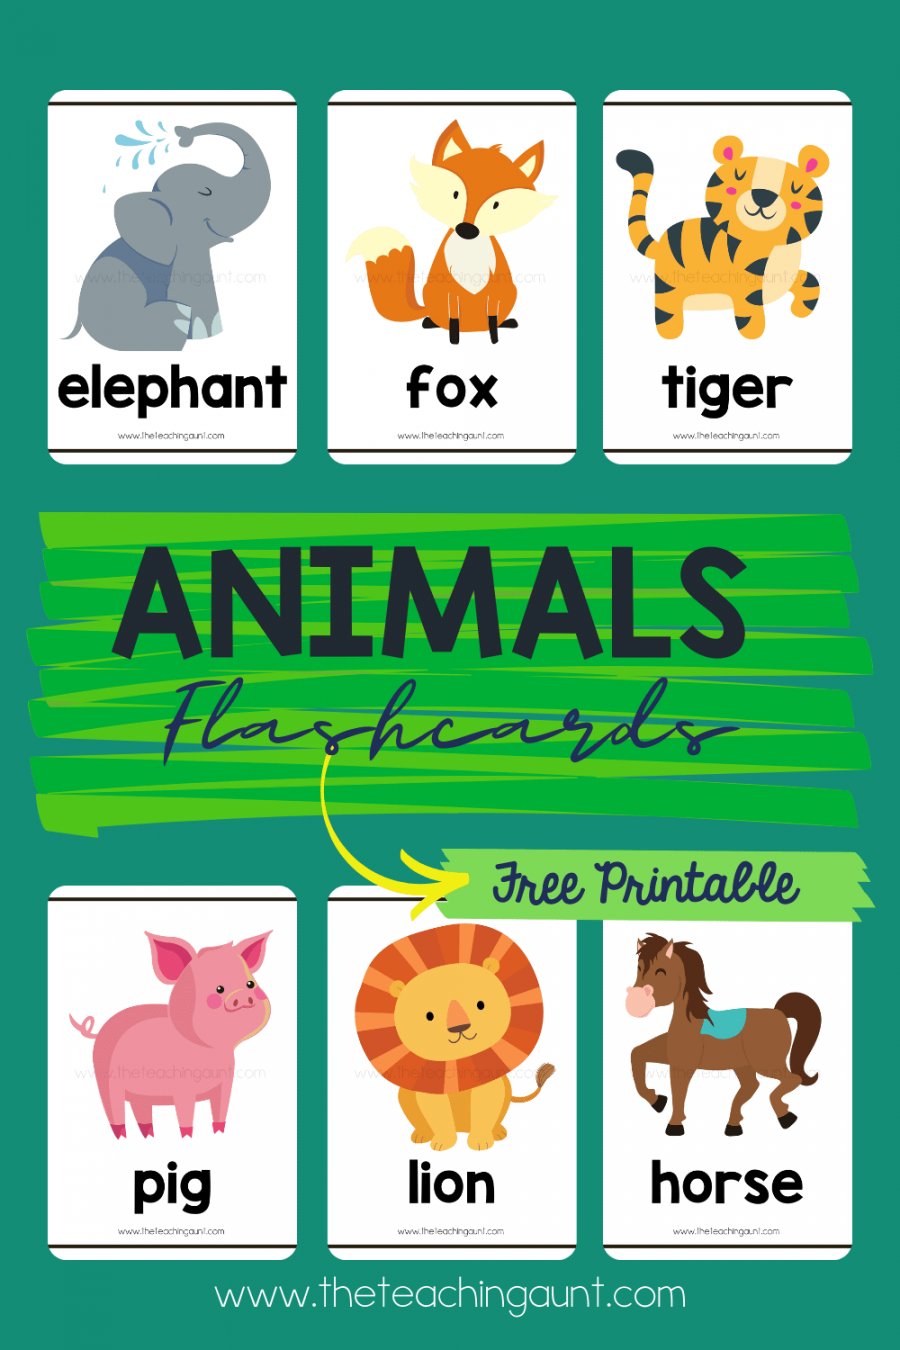 Free Animal Flashcards - The Teaching Aunt - FREE Printables - Free Printable Animal Pictures